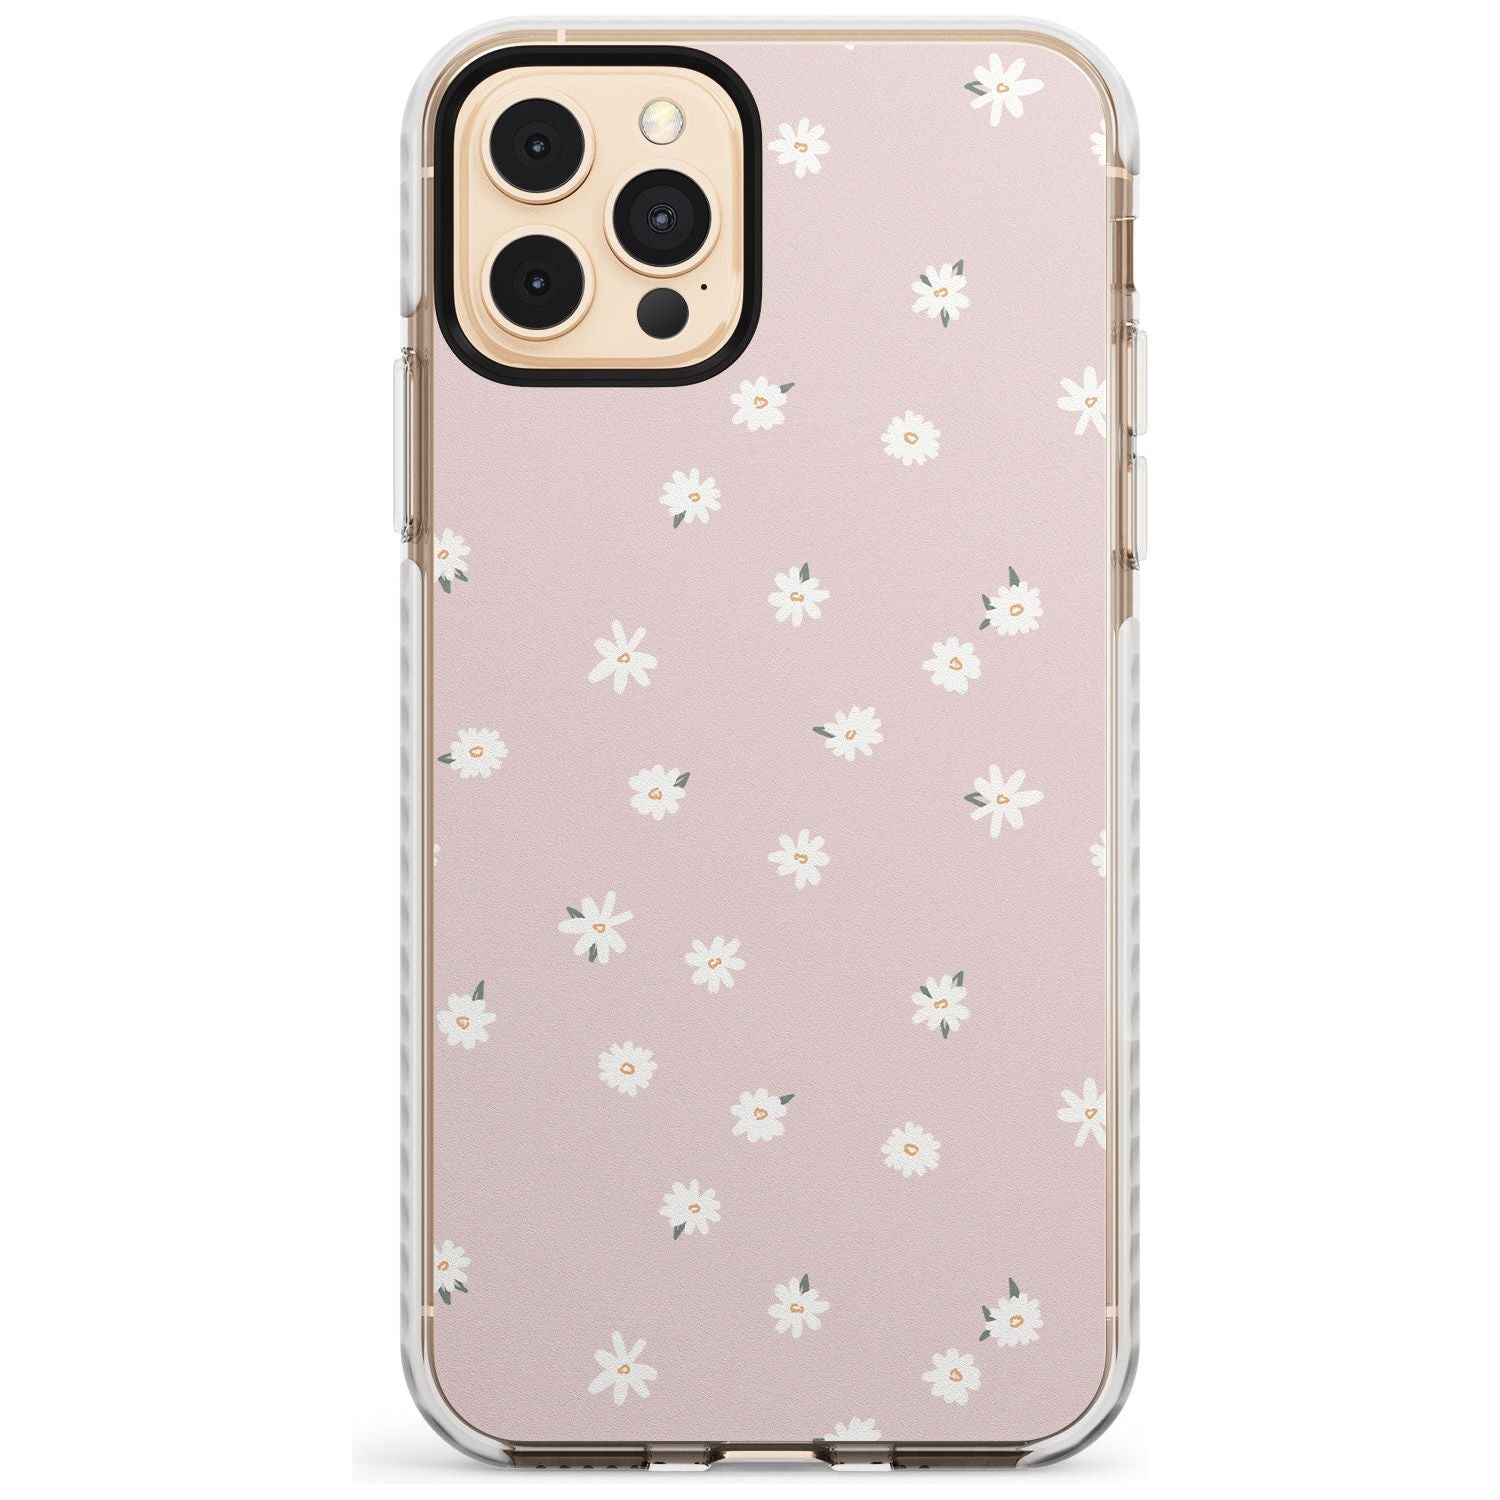 Painted Daises on Pink - Cute Floral Daisy Design Slim TPU Phone Case for iPhone 11 Pro Max